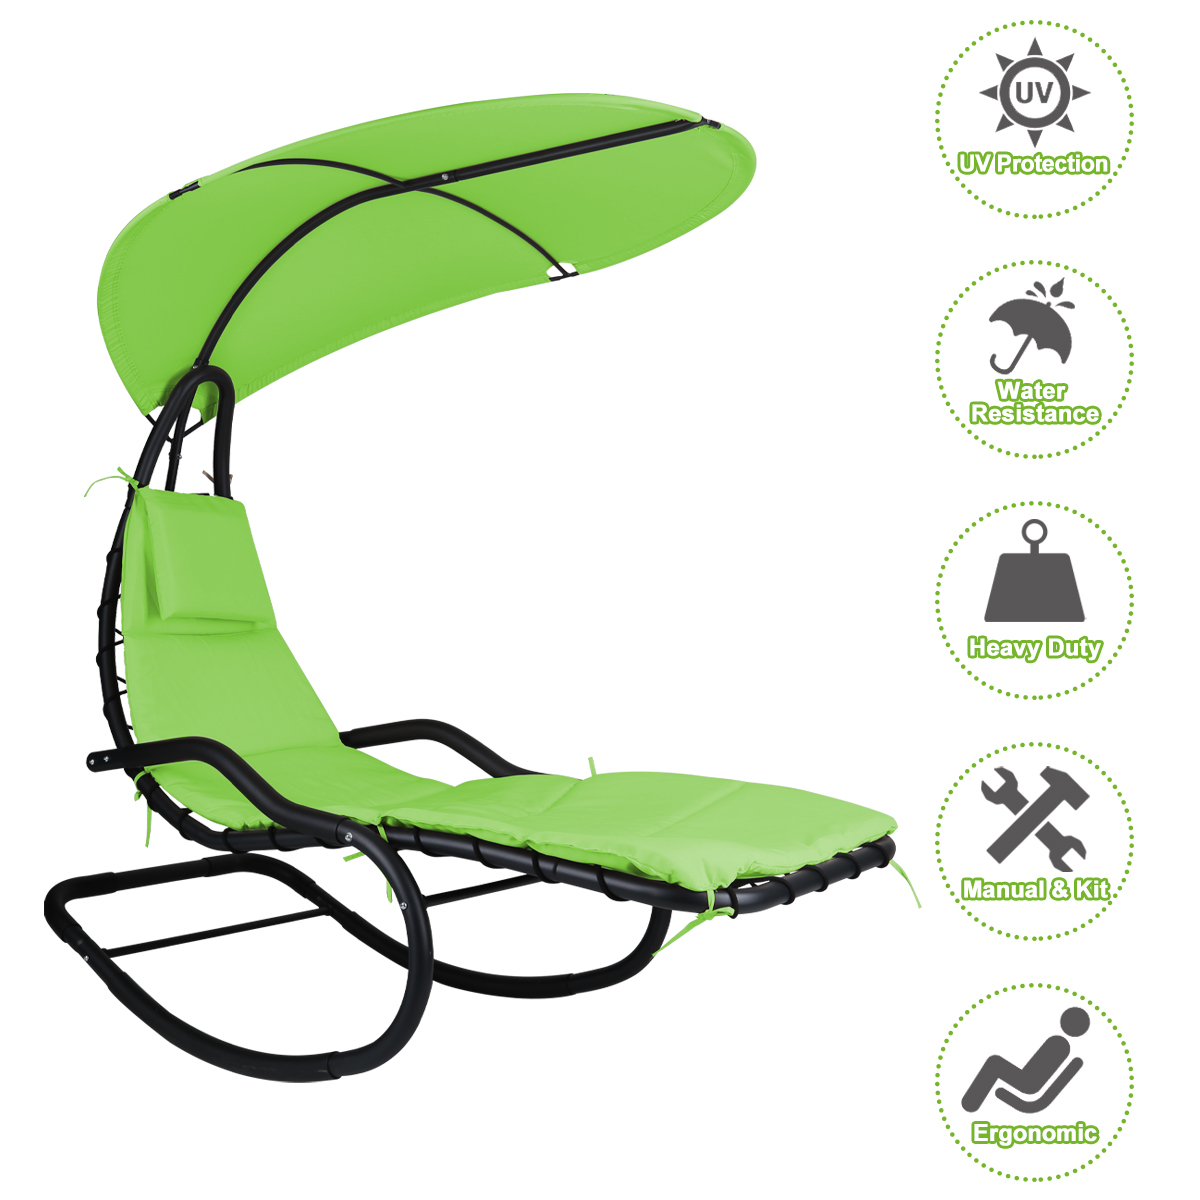 Rocking Hanging Lounge Chair - Curved Chaise Rocking Lounge Chair Swing For Backyard Patio w/ Built-in Pillow Removable Canopy with stand {Green} - image 5 of 8